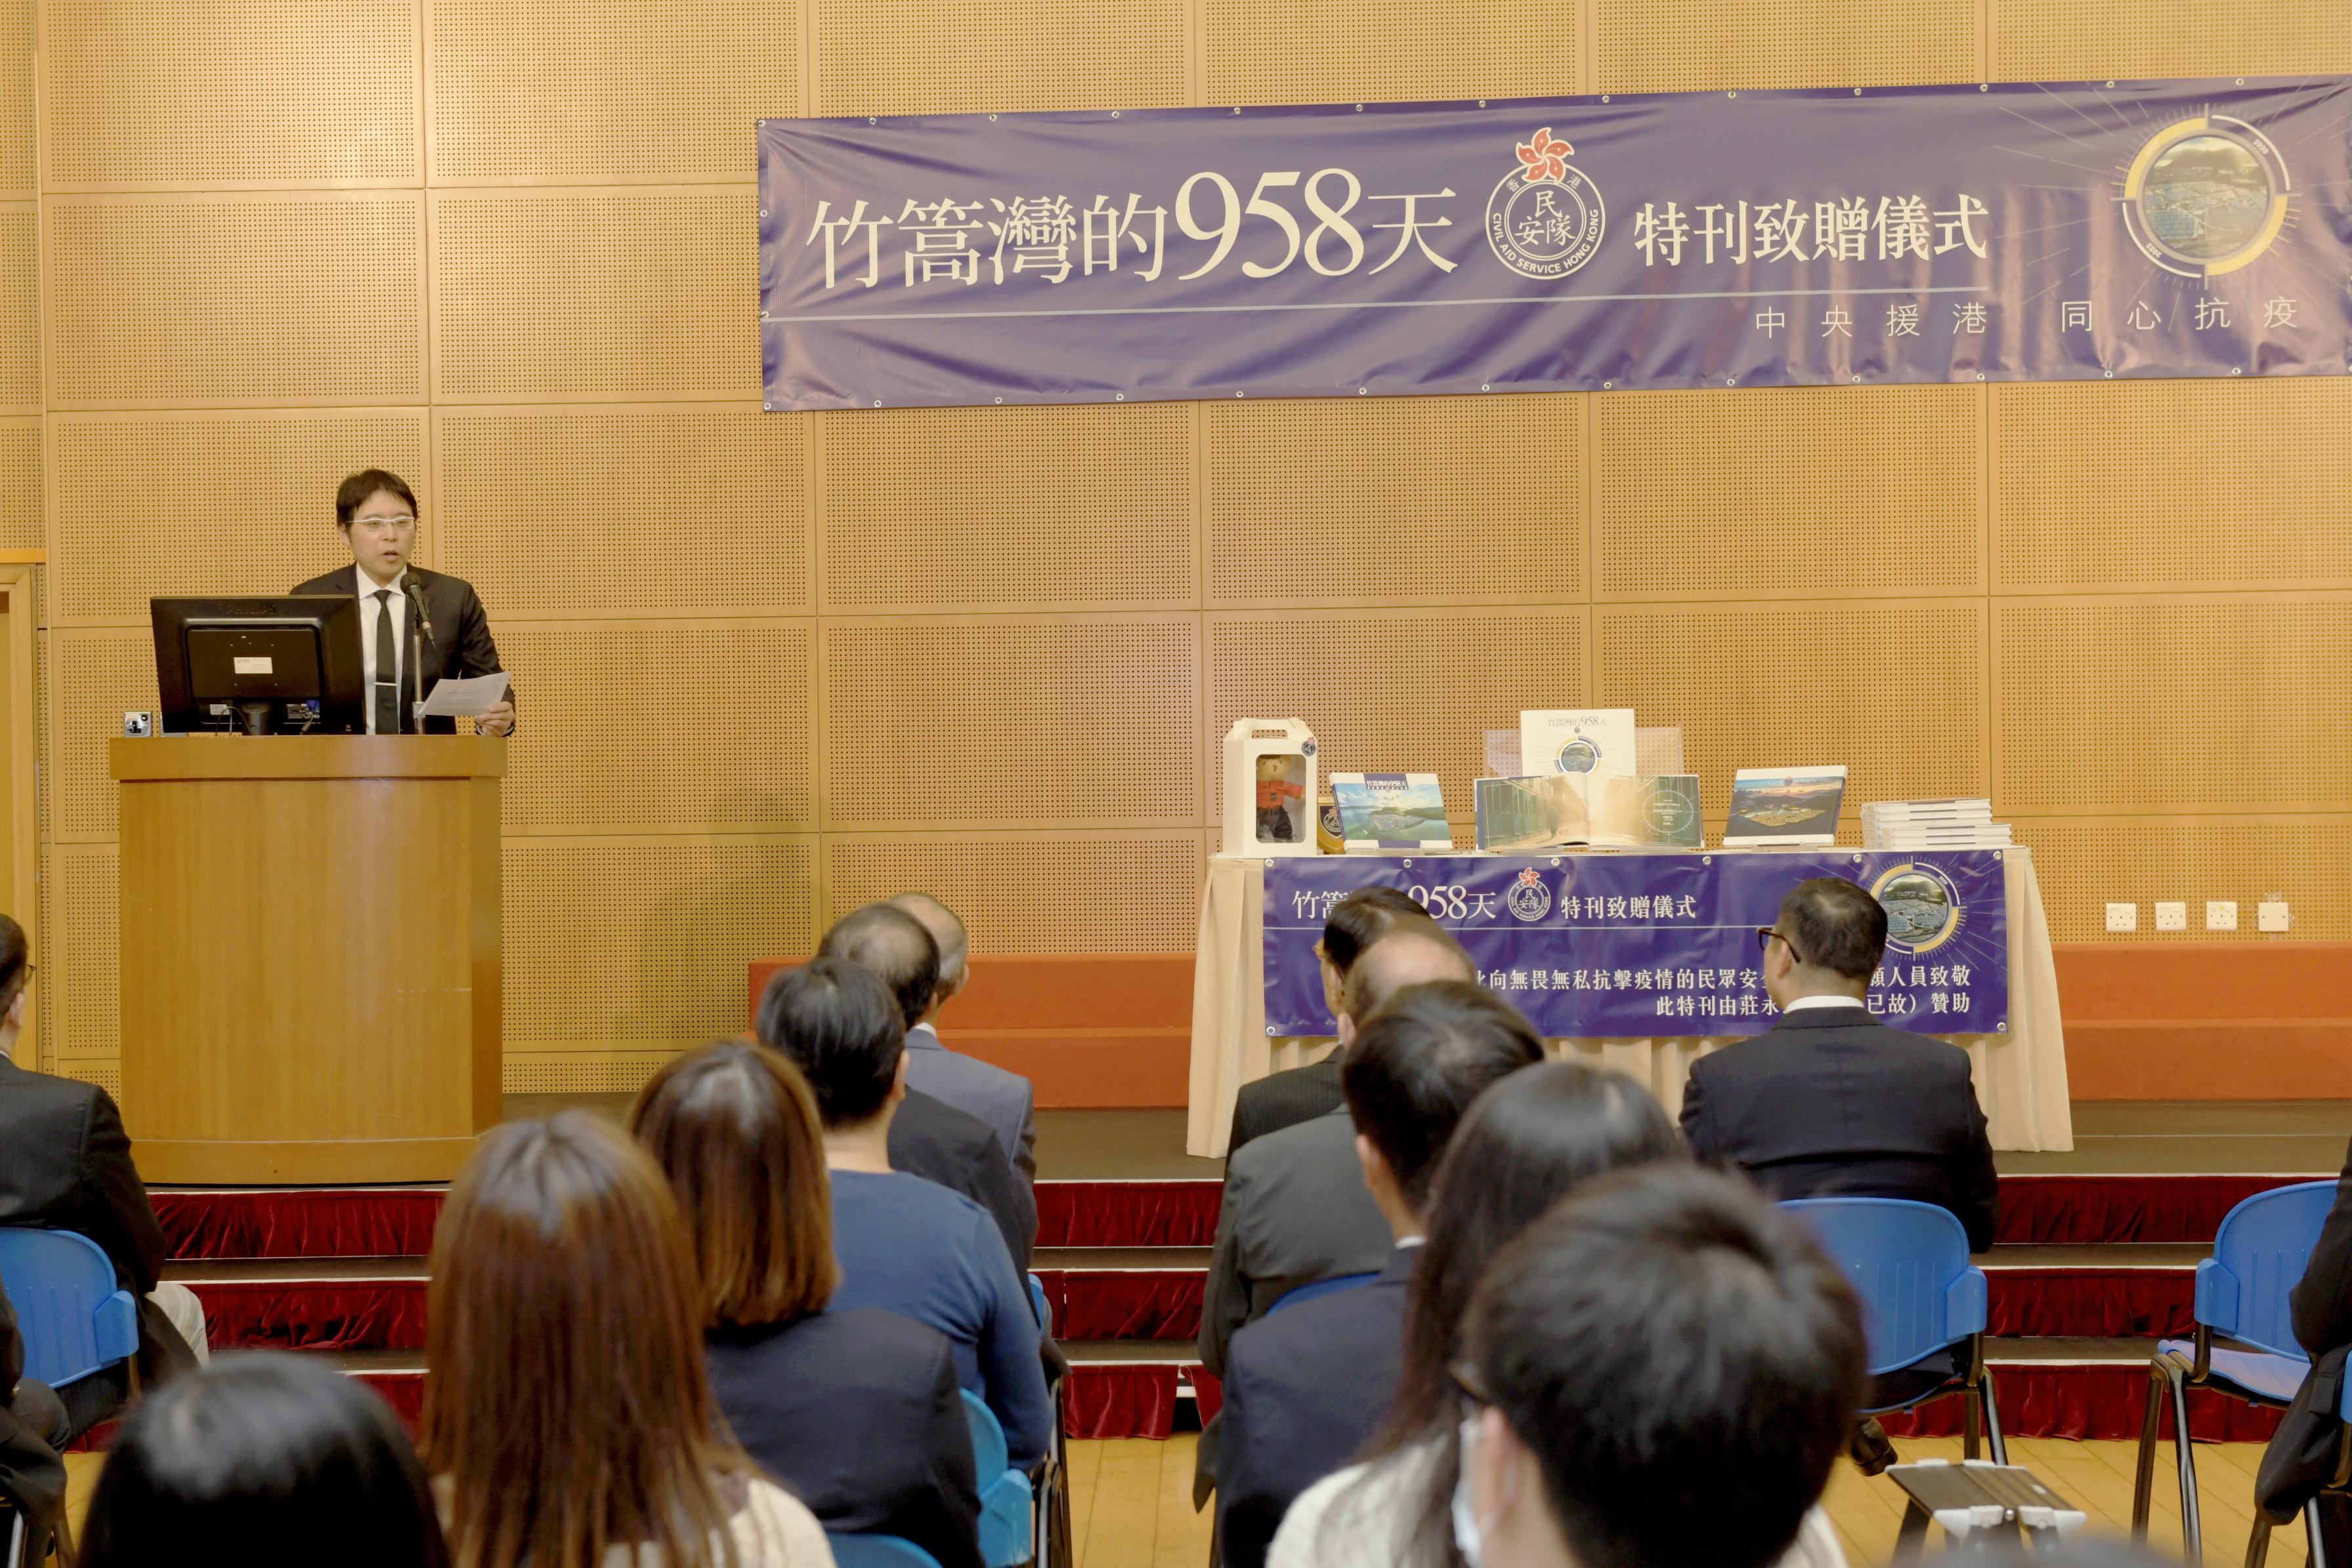 The Civil Aid Service today (June 16) held a presentation ceremony for the Penny's Bay commemorative booklet "958 days in Penny's Bay". Photo shows member of the National Committee of the Chinese People's Political Consultative Conference Dr Chuang Tze-cheung delivering a speech in the presentation ceremony.